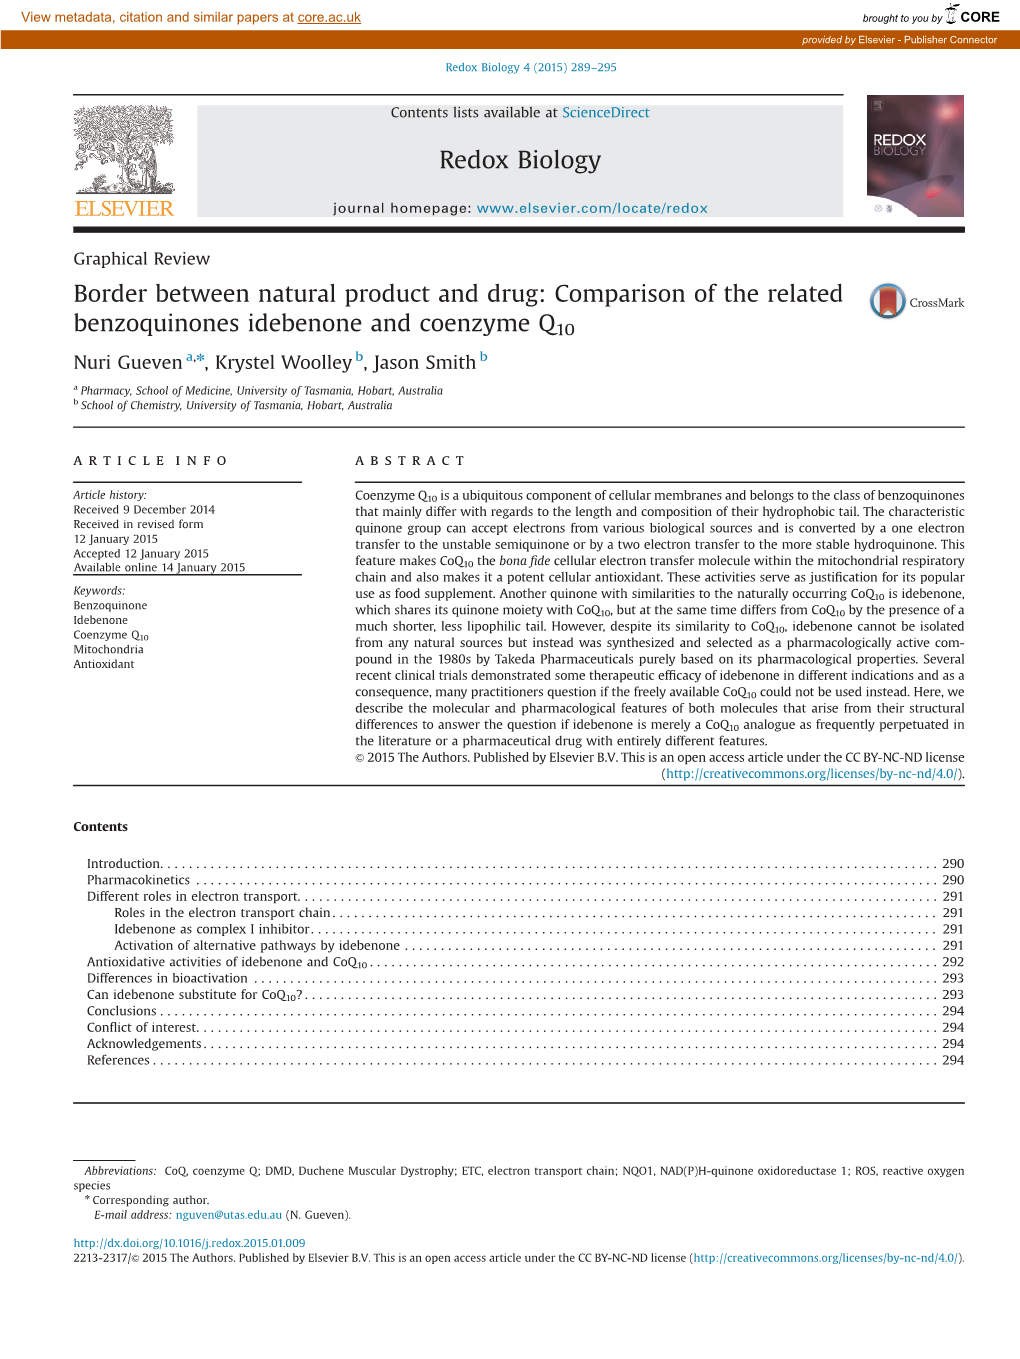 Border Between Natural Product and Drug Comparison of The